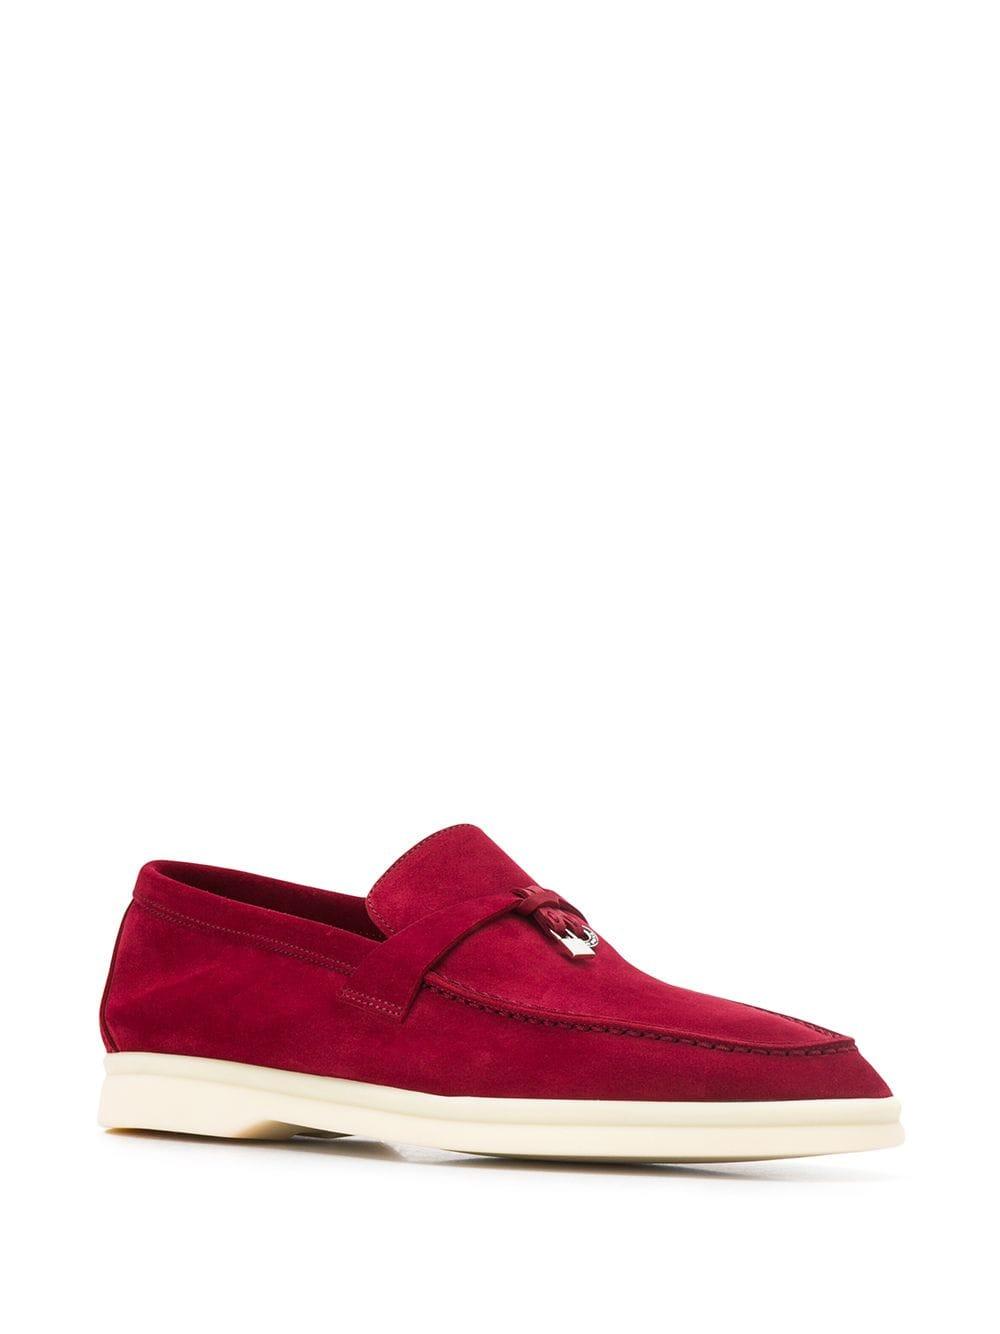 Loro Piana Rubber Slip On Loafers in Red - Lyst